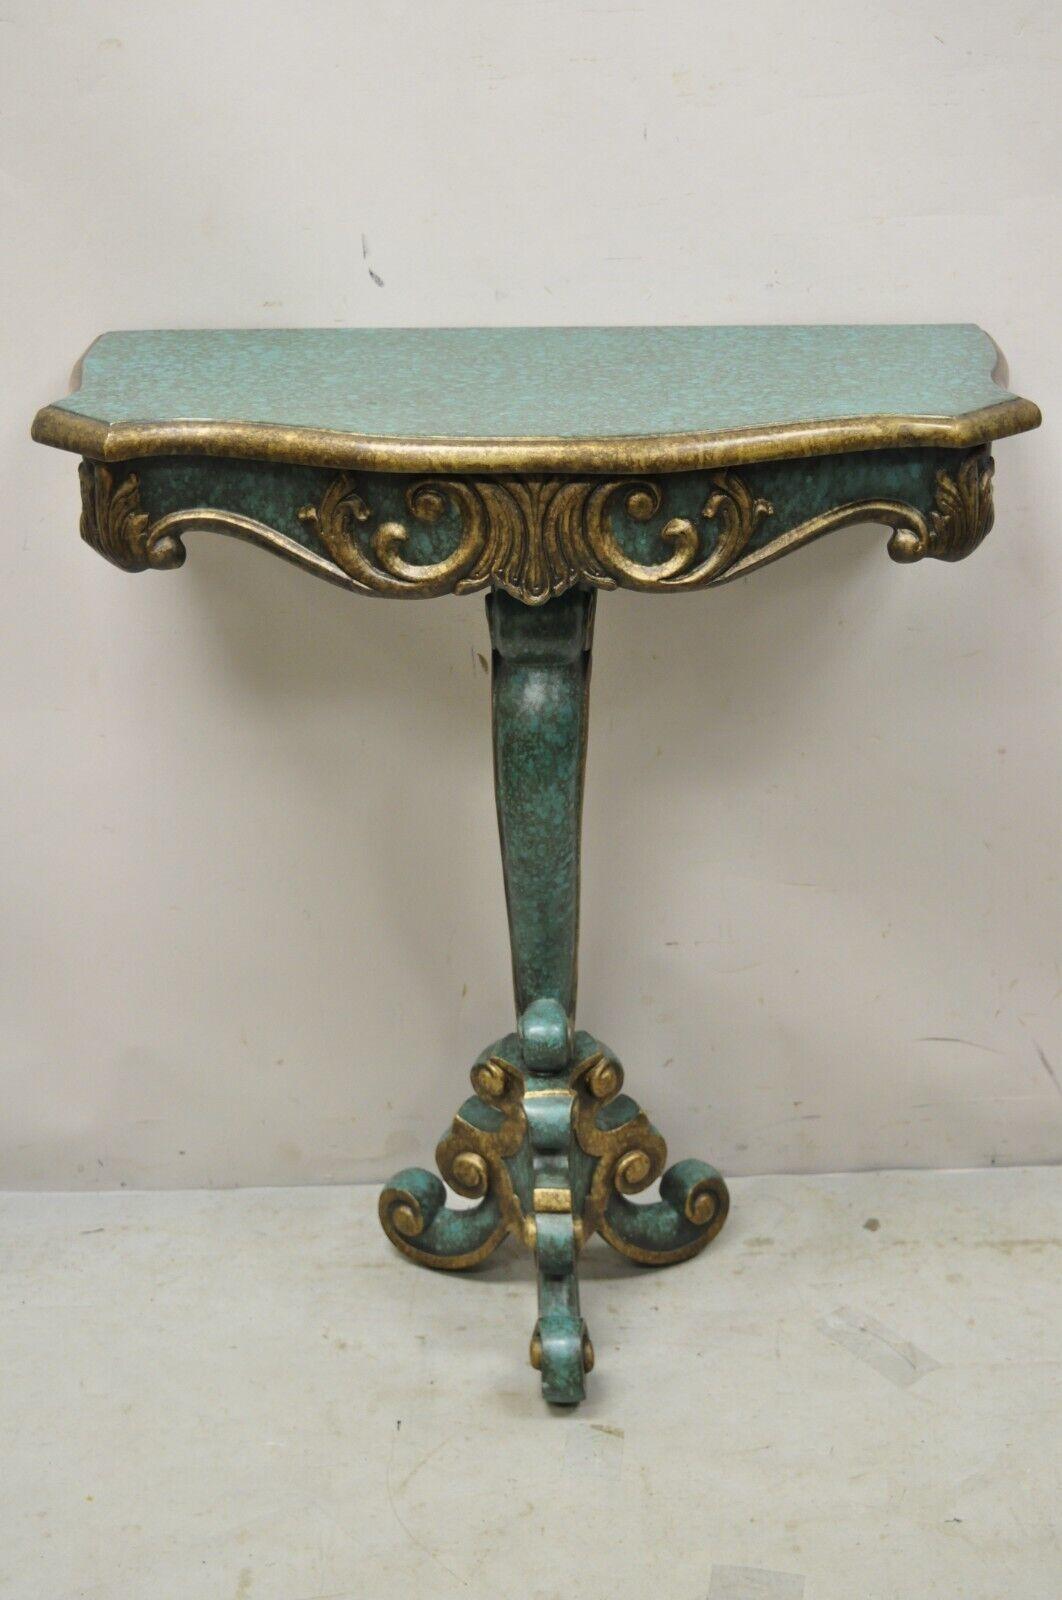 Rococo Baroque Style Green Blue Gold Small Pedestal Base Console Side Table. Item features a unique greenish blue painted finish with distressed gold accents, shapely pedestal base, carved and decorated skit, very nice item, great style and form.